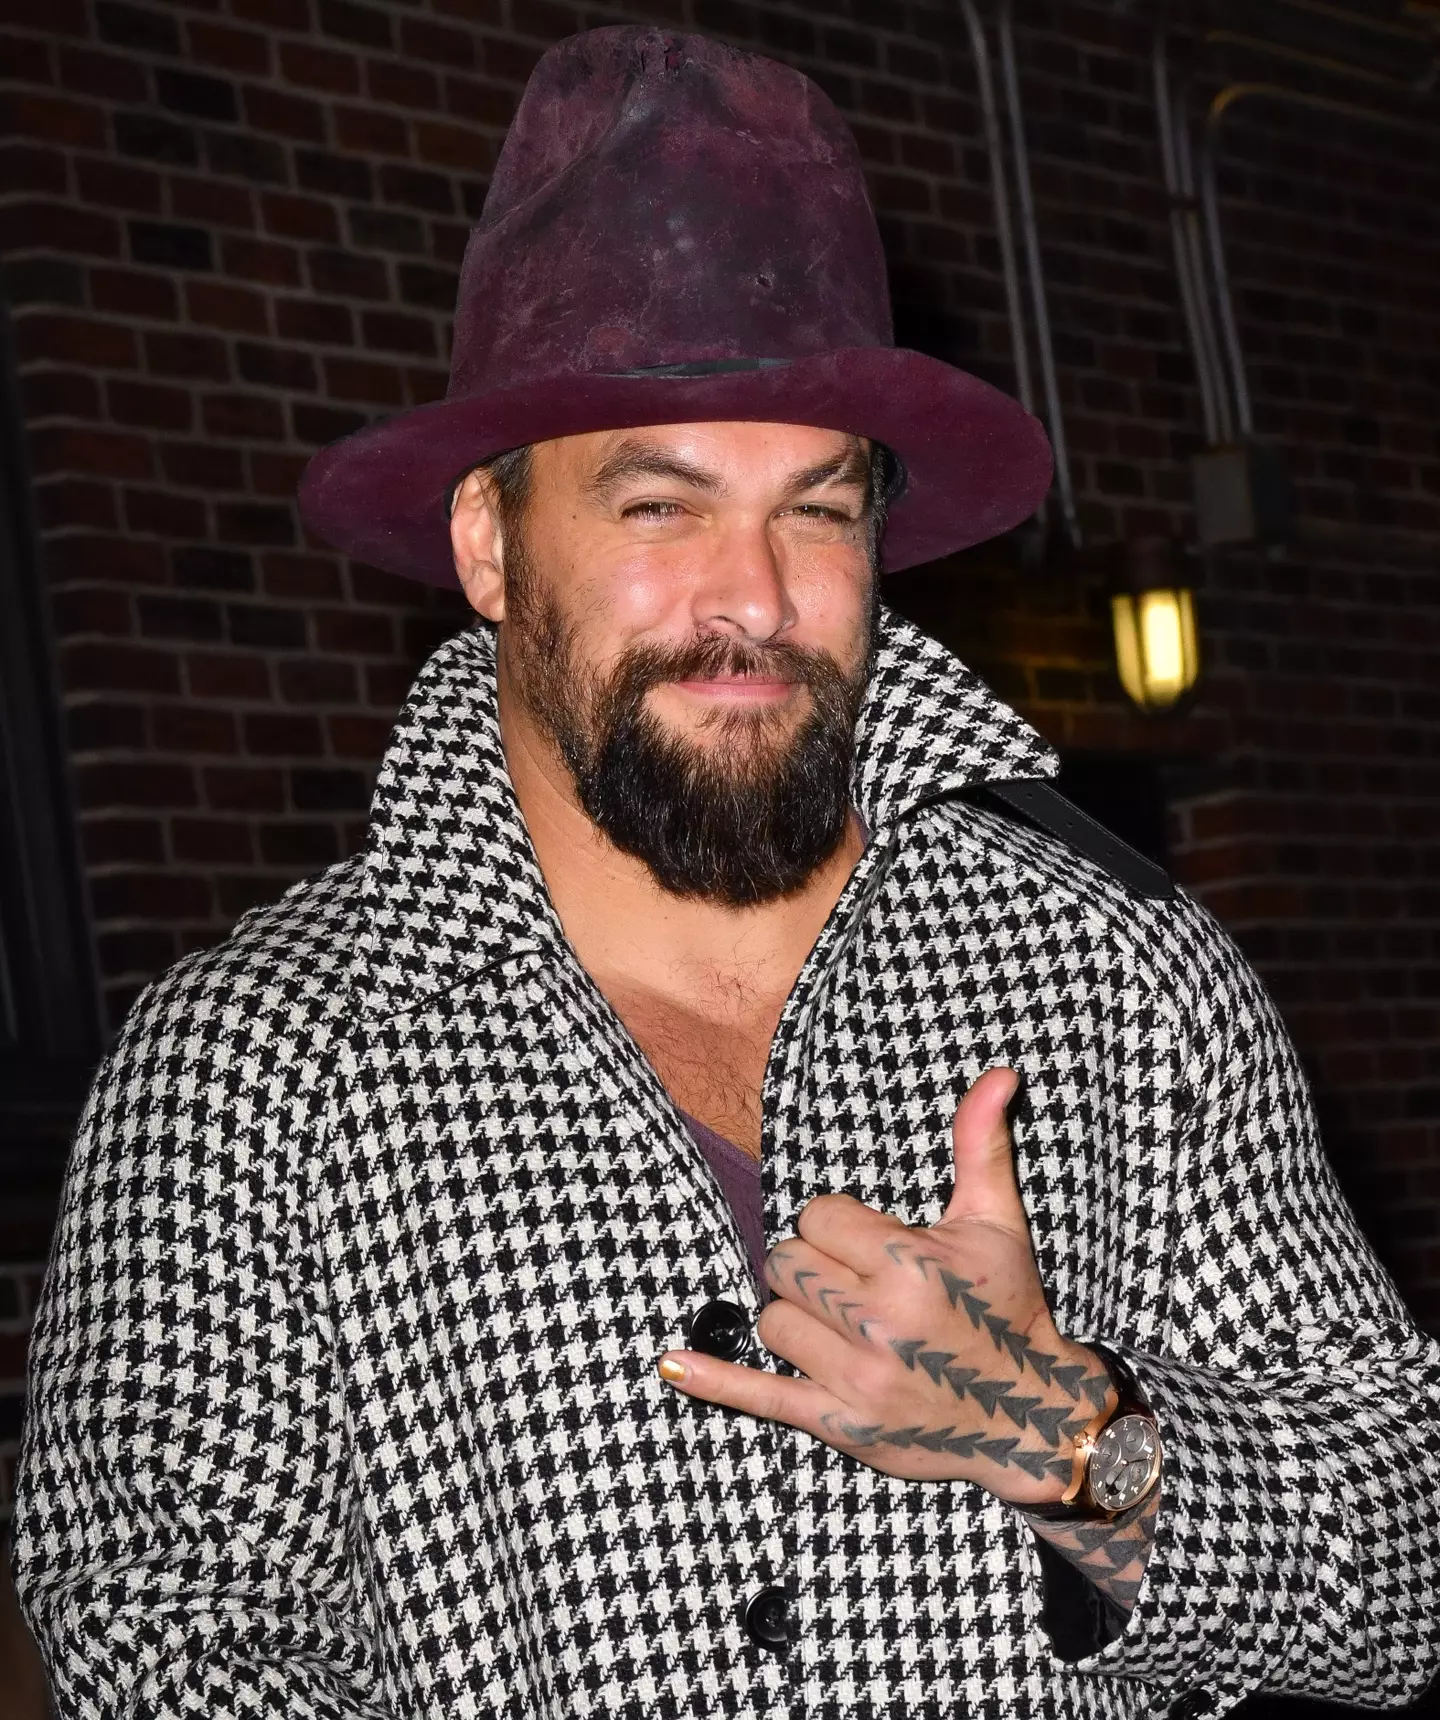 Jason Momoa has since clarified what he meant by 'homeless'.